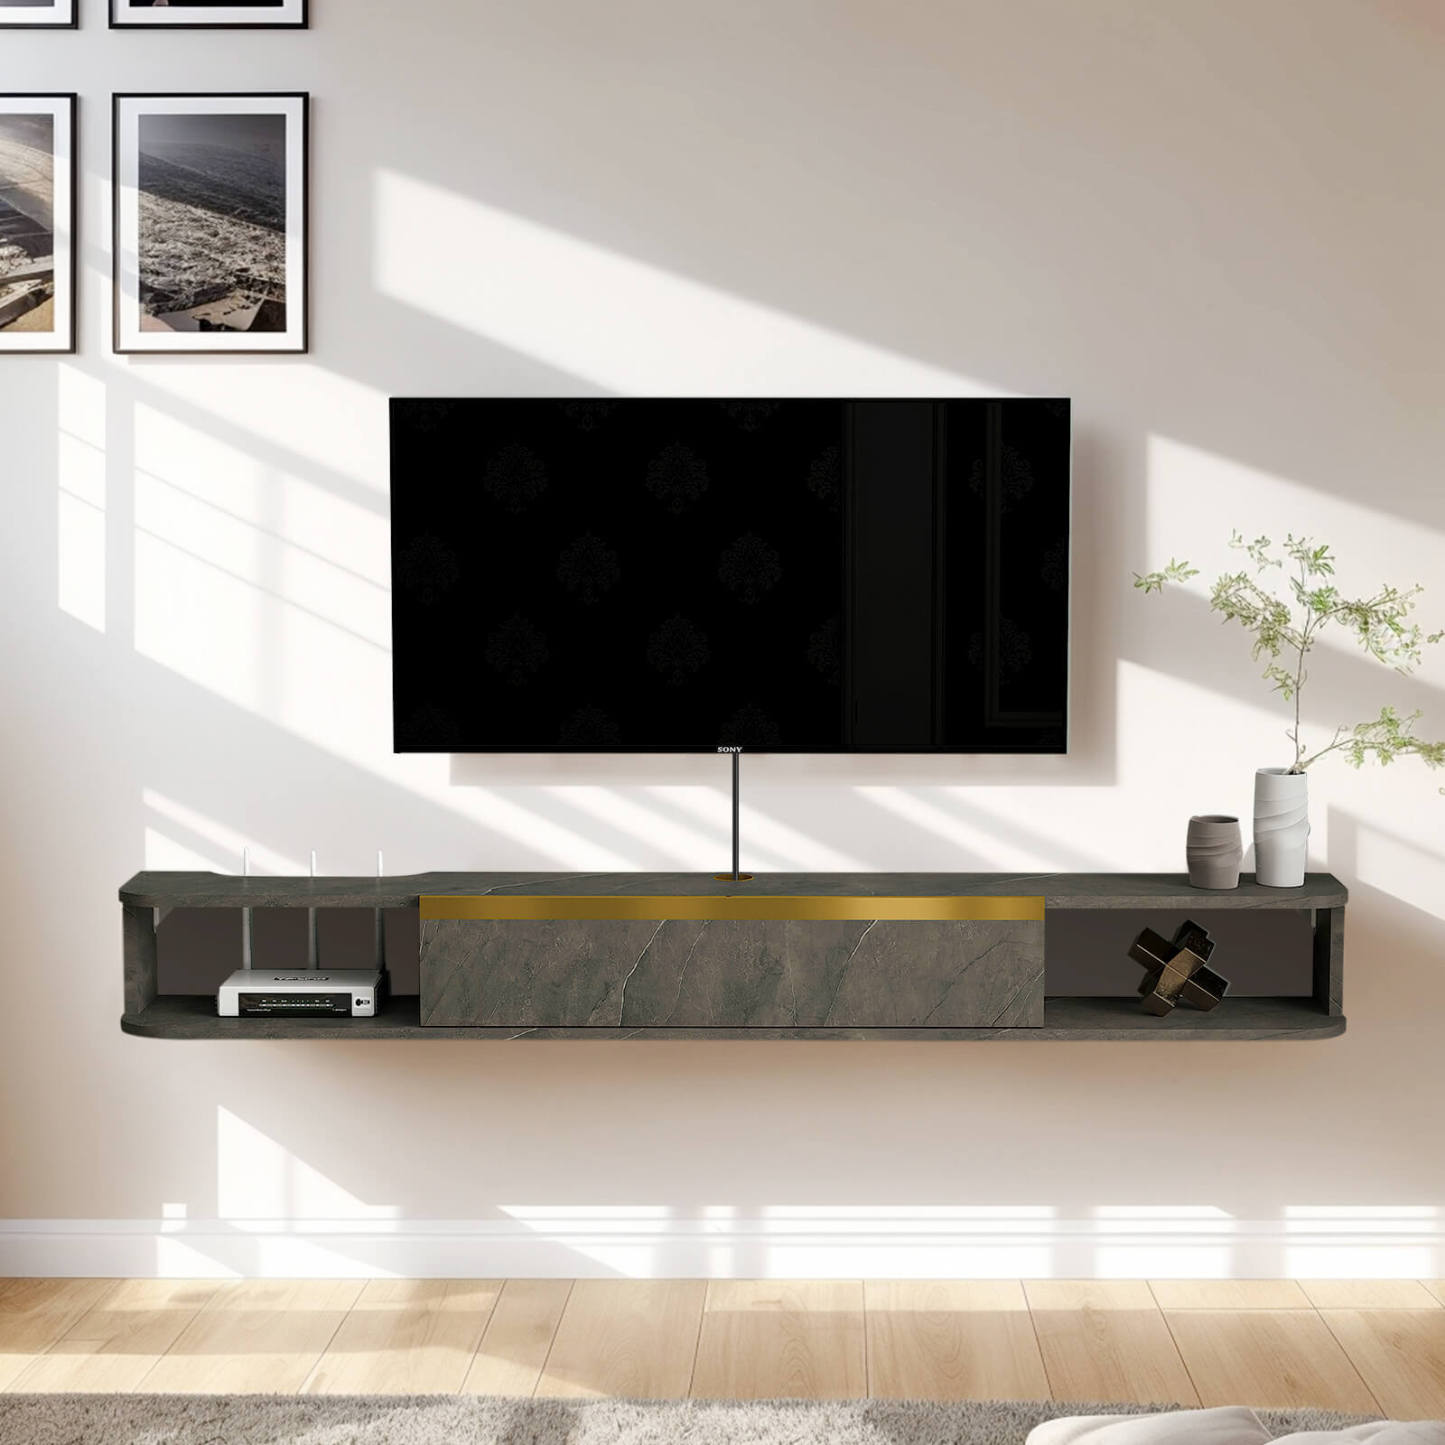 78.74" Wood Floating TV Stand Wall Shelf with Gold Accent for 85" TV, Dark Grey